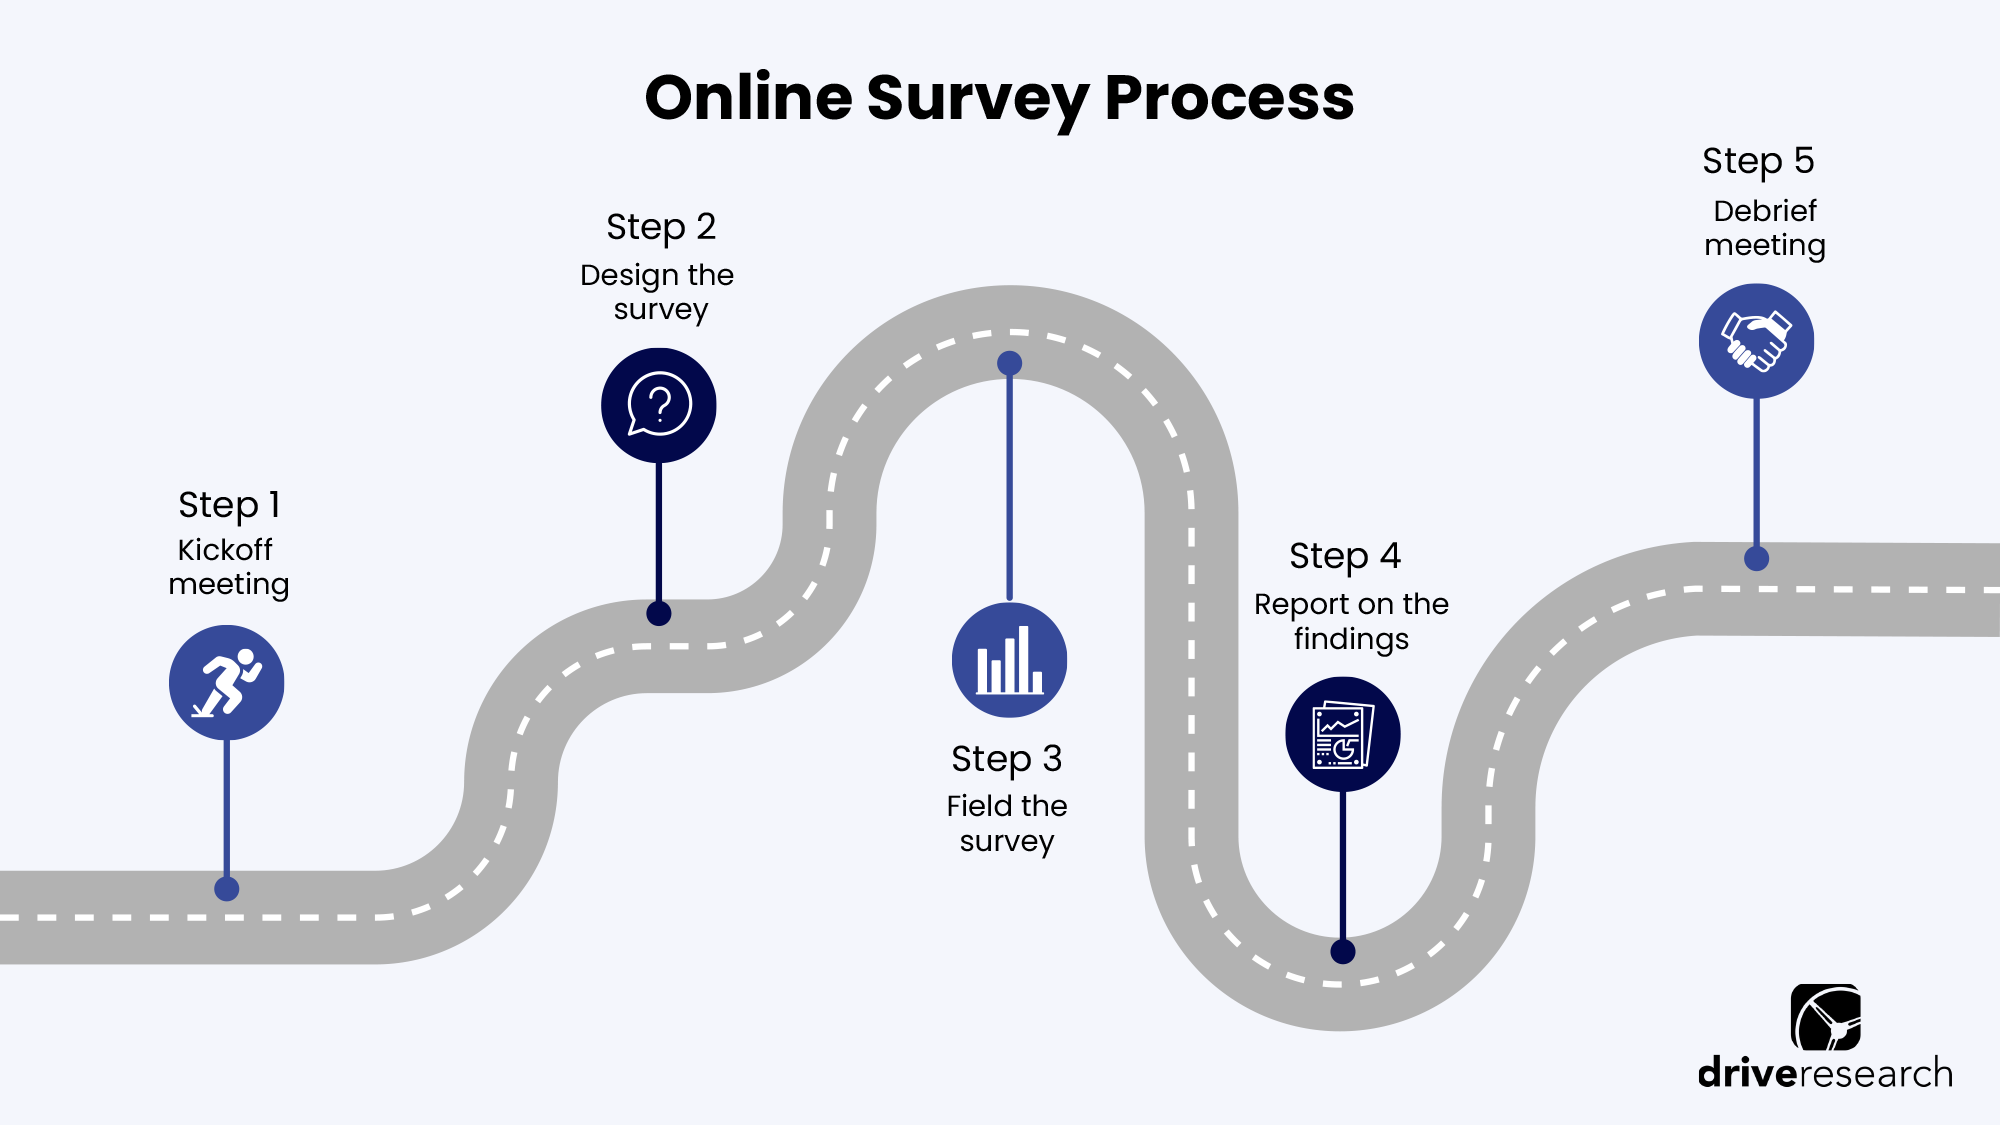 online survey process by drive research